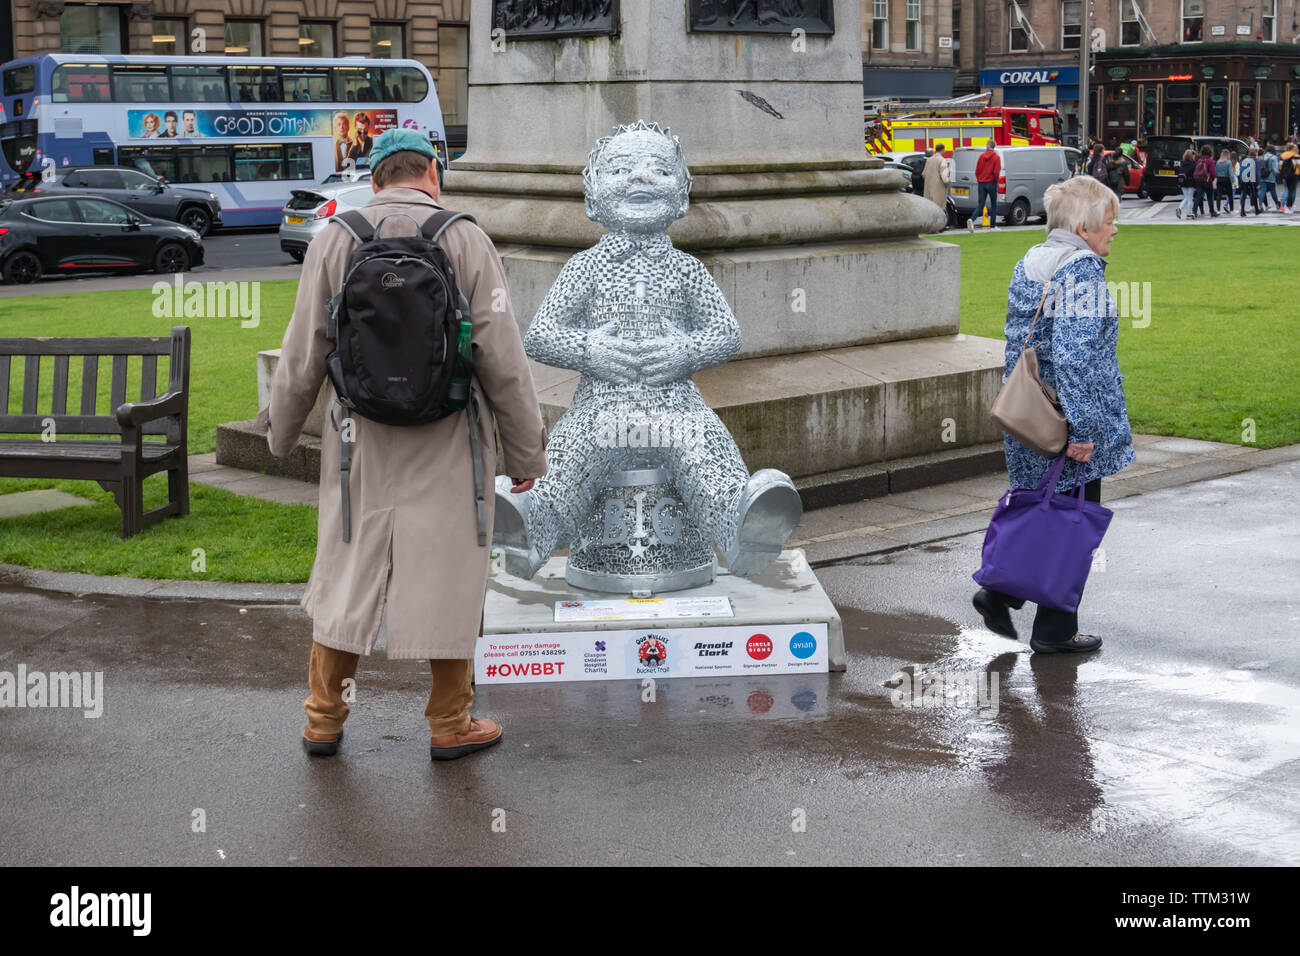 Glasgow, Scotland, UK. 17th June, 2019. Metal Oor Wullie, created by Jason Paterson. This sculpture has been forged with 450 'Oor Wullie' steel stencils, 200 'Bucket Trail' steel stencils and 2,000 pieces of rectangular steel, which have been welded together to recreate the iconic features of Oor Wullie. The light inside the sculpture projects Oor Wullie across the area, like a shining beacon of support for Glasgow Children's Hospital Charity. The sculpture is part of Oor Wullie’s BIG Bucket Trail. Credit: Skully/Alamy Live News Stock Photo